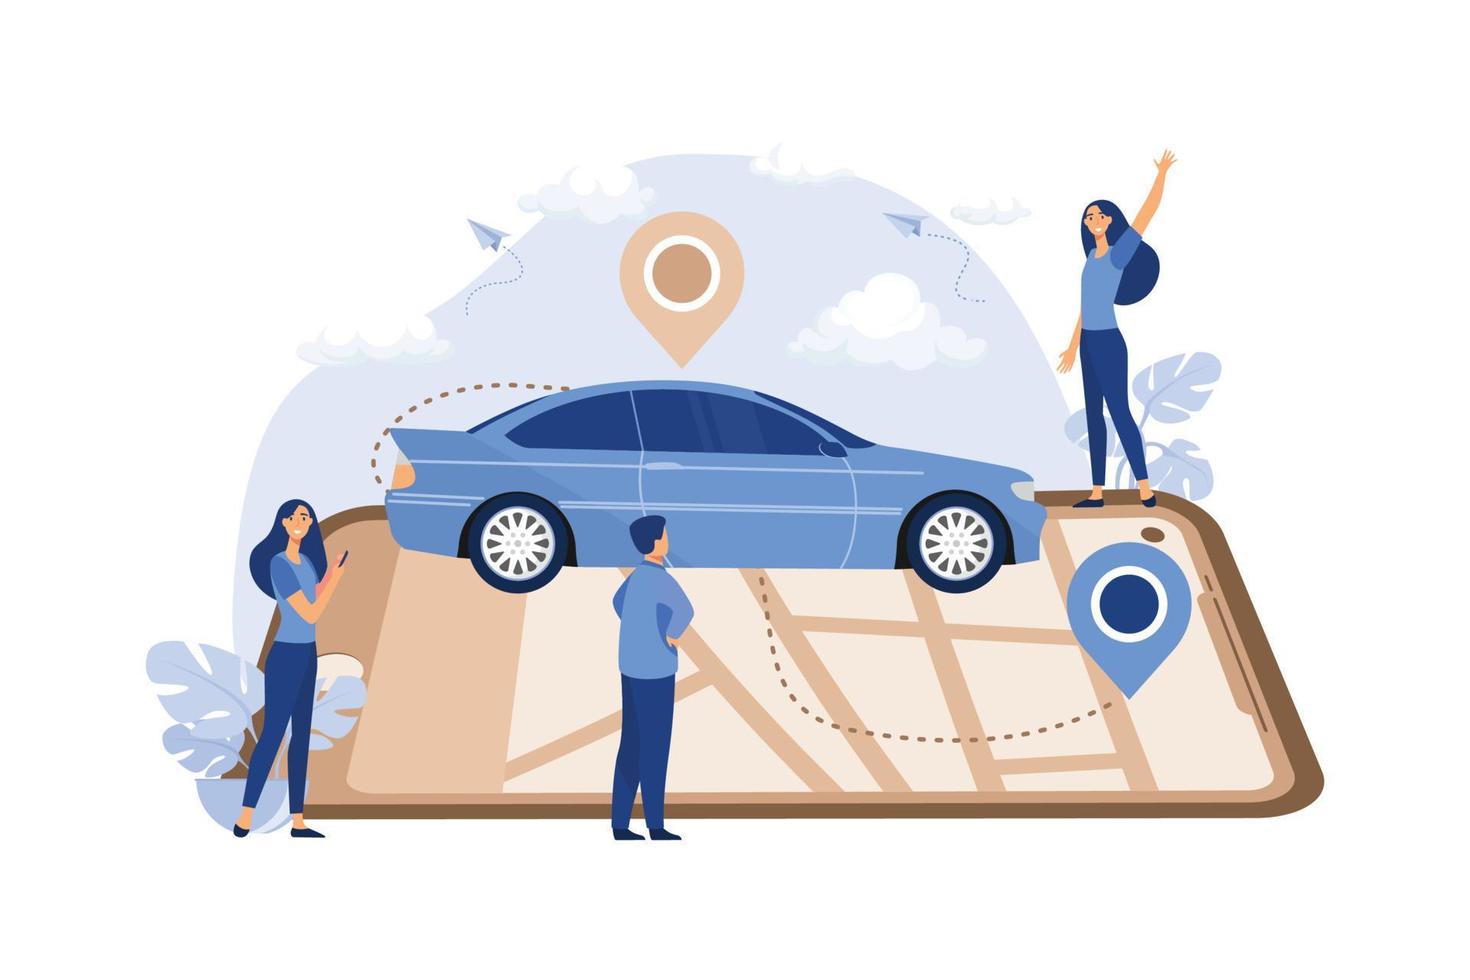 Gps system, cartography display, location on the city map, navigation in the smartphone and tablet, the path is paved to the car. flat design modern illustration vector